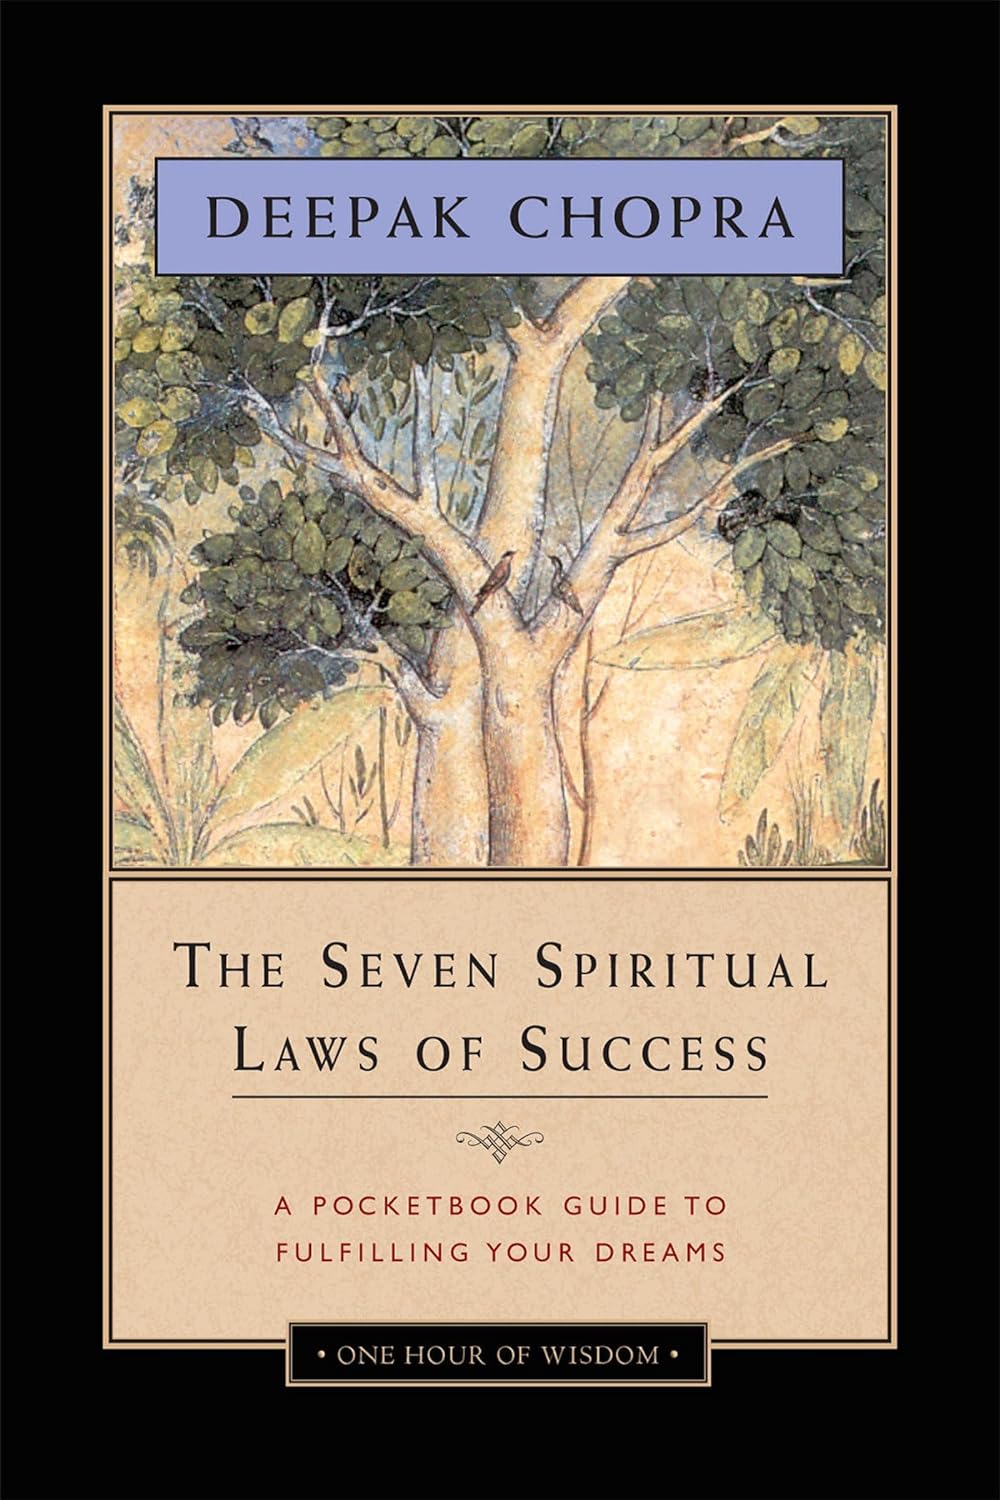 Based on natural laws that govern all of creation, this book shatters the myth that success is the result of hard work, exacting plans, or driving ambition. Instead, Deepak Chopra offers a life-altering perspective on the attainment of success: When we understand our true nature and learn to live in harmony with natural law, a sense of well-being, good health, fulfilling relationships, and material abundance spring forth easily and effortlessly.